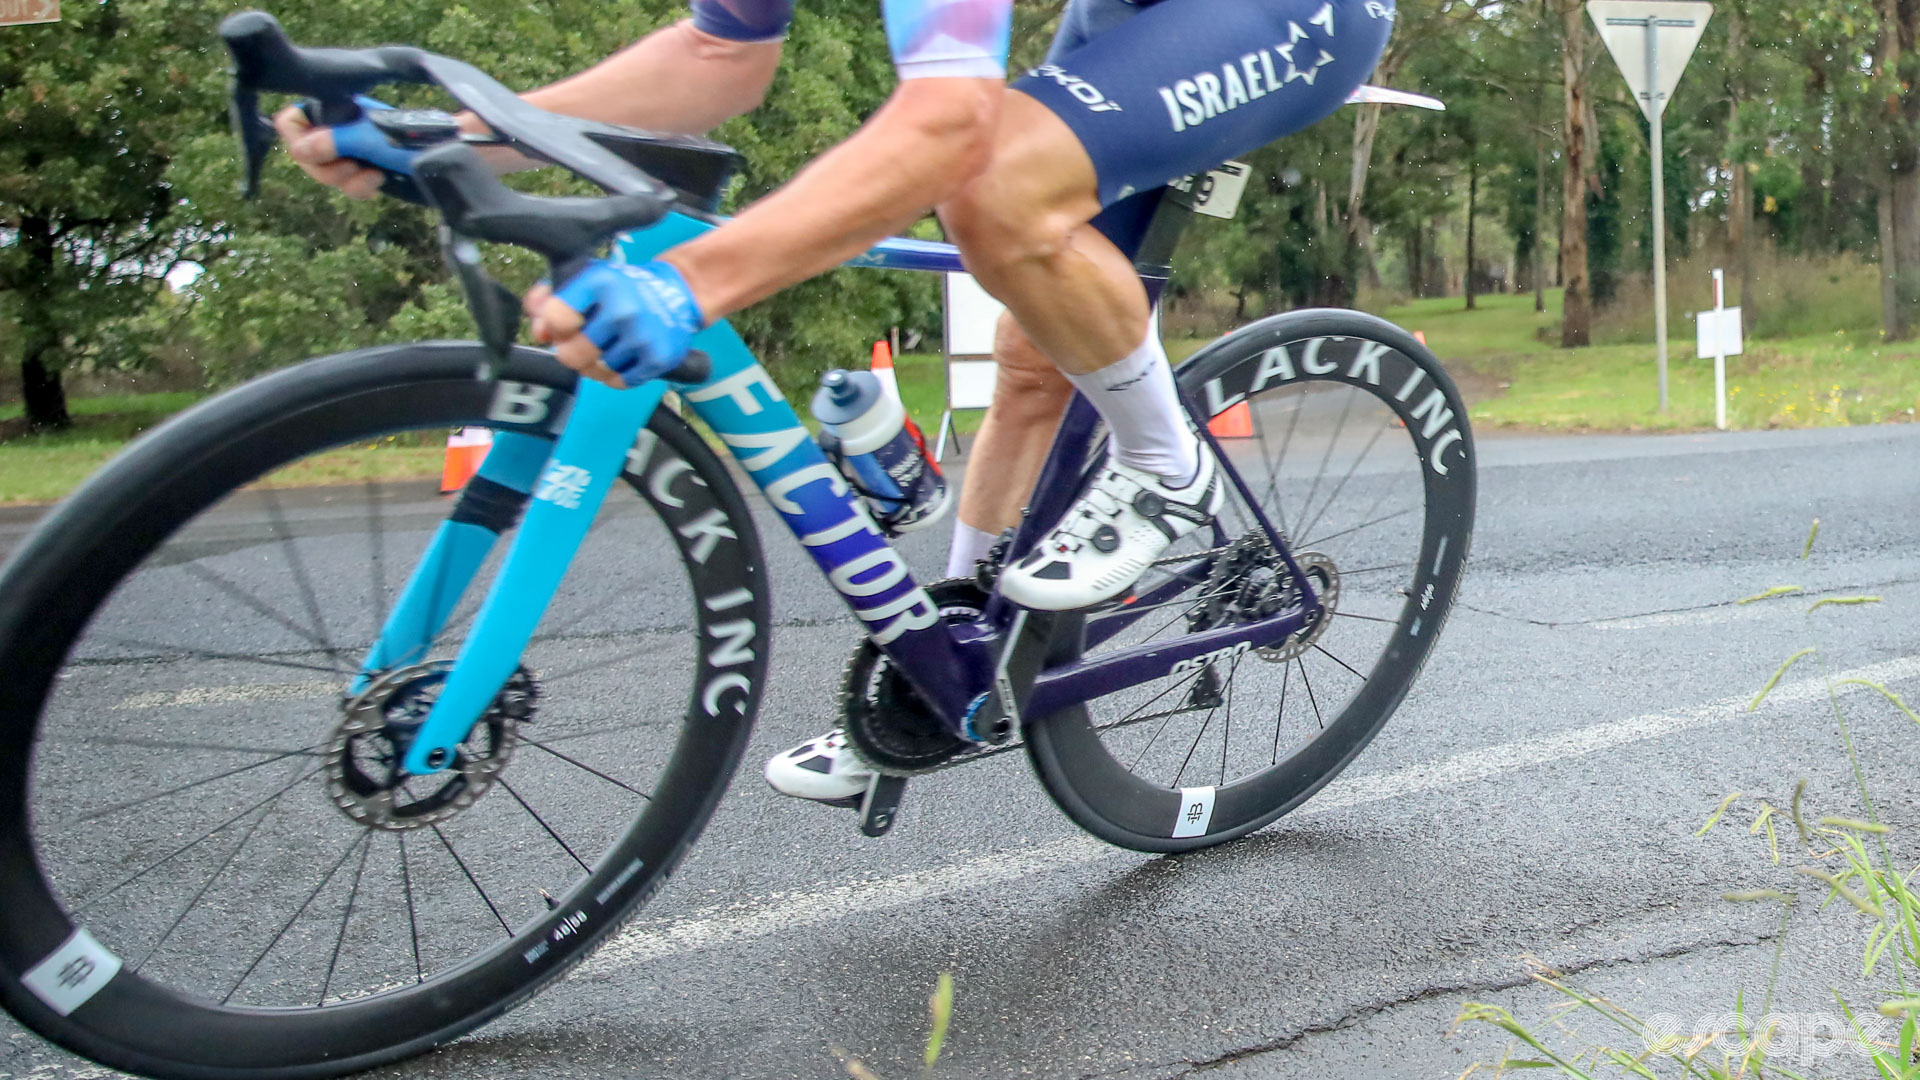 The photo shows Simon Clarke's new Factor Ostro racing at the Australian road race national championships.